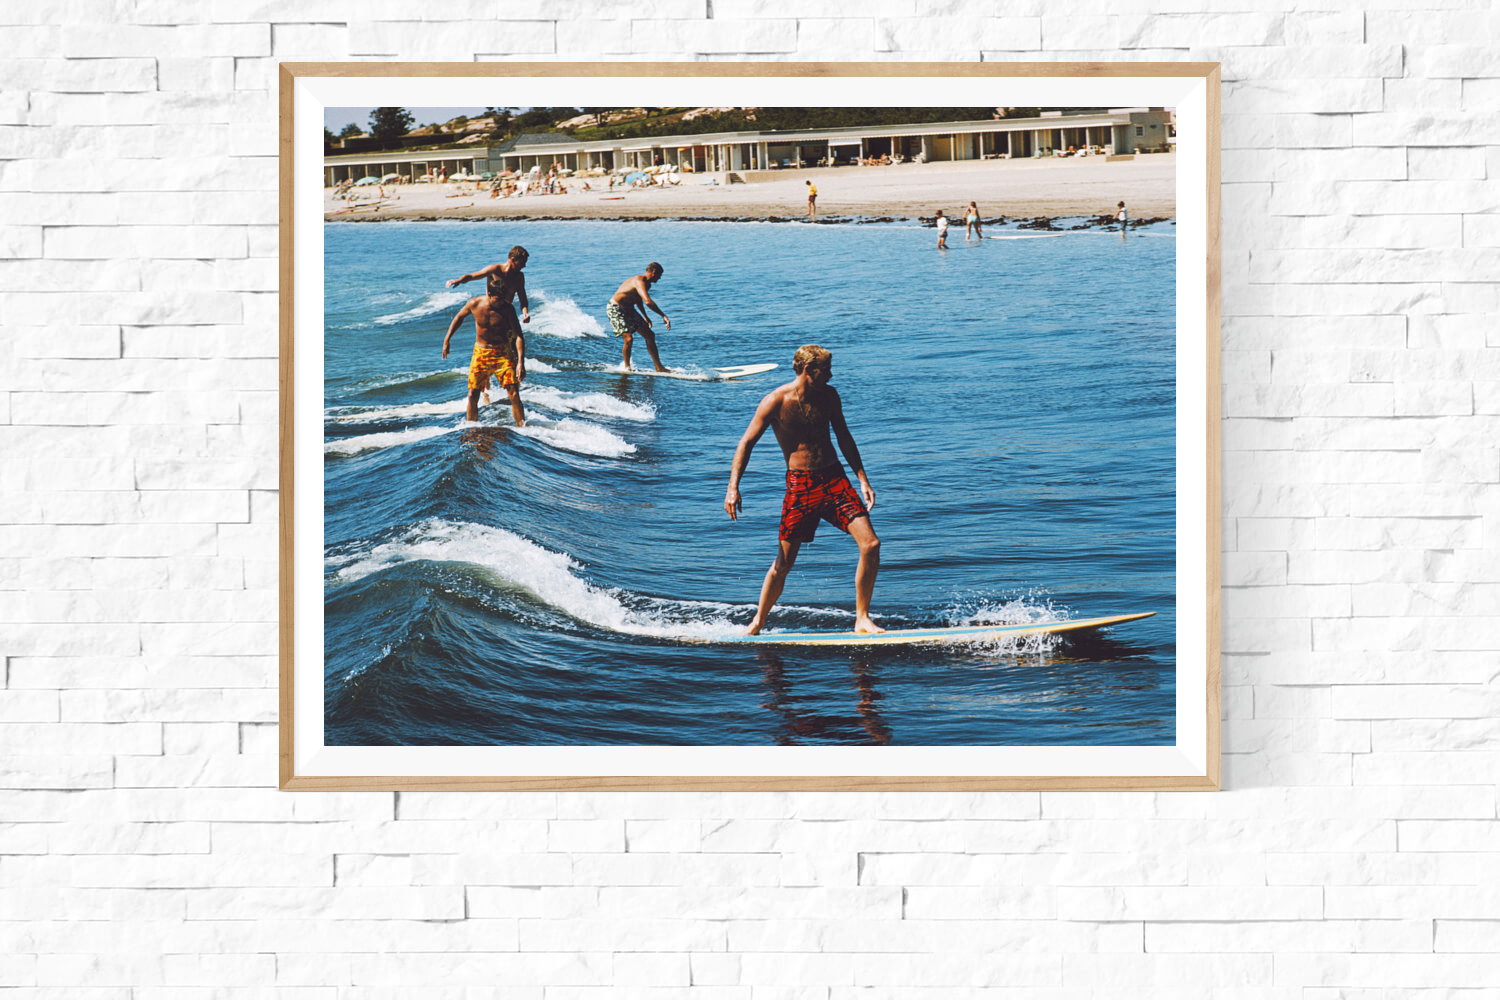 Framed Slim Aarons: Surfing Brothers, Newport Beach California photo for sale Getty Images Gallery